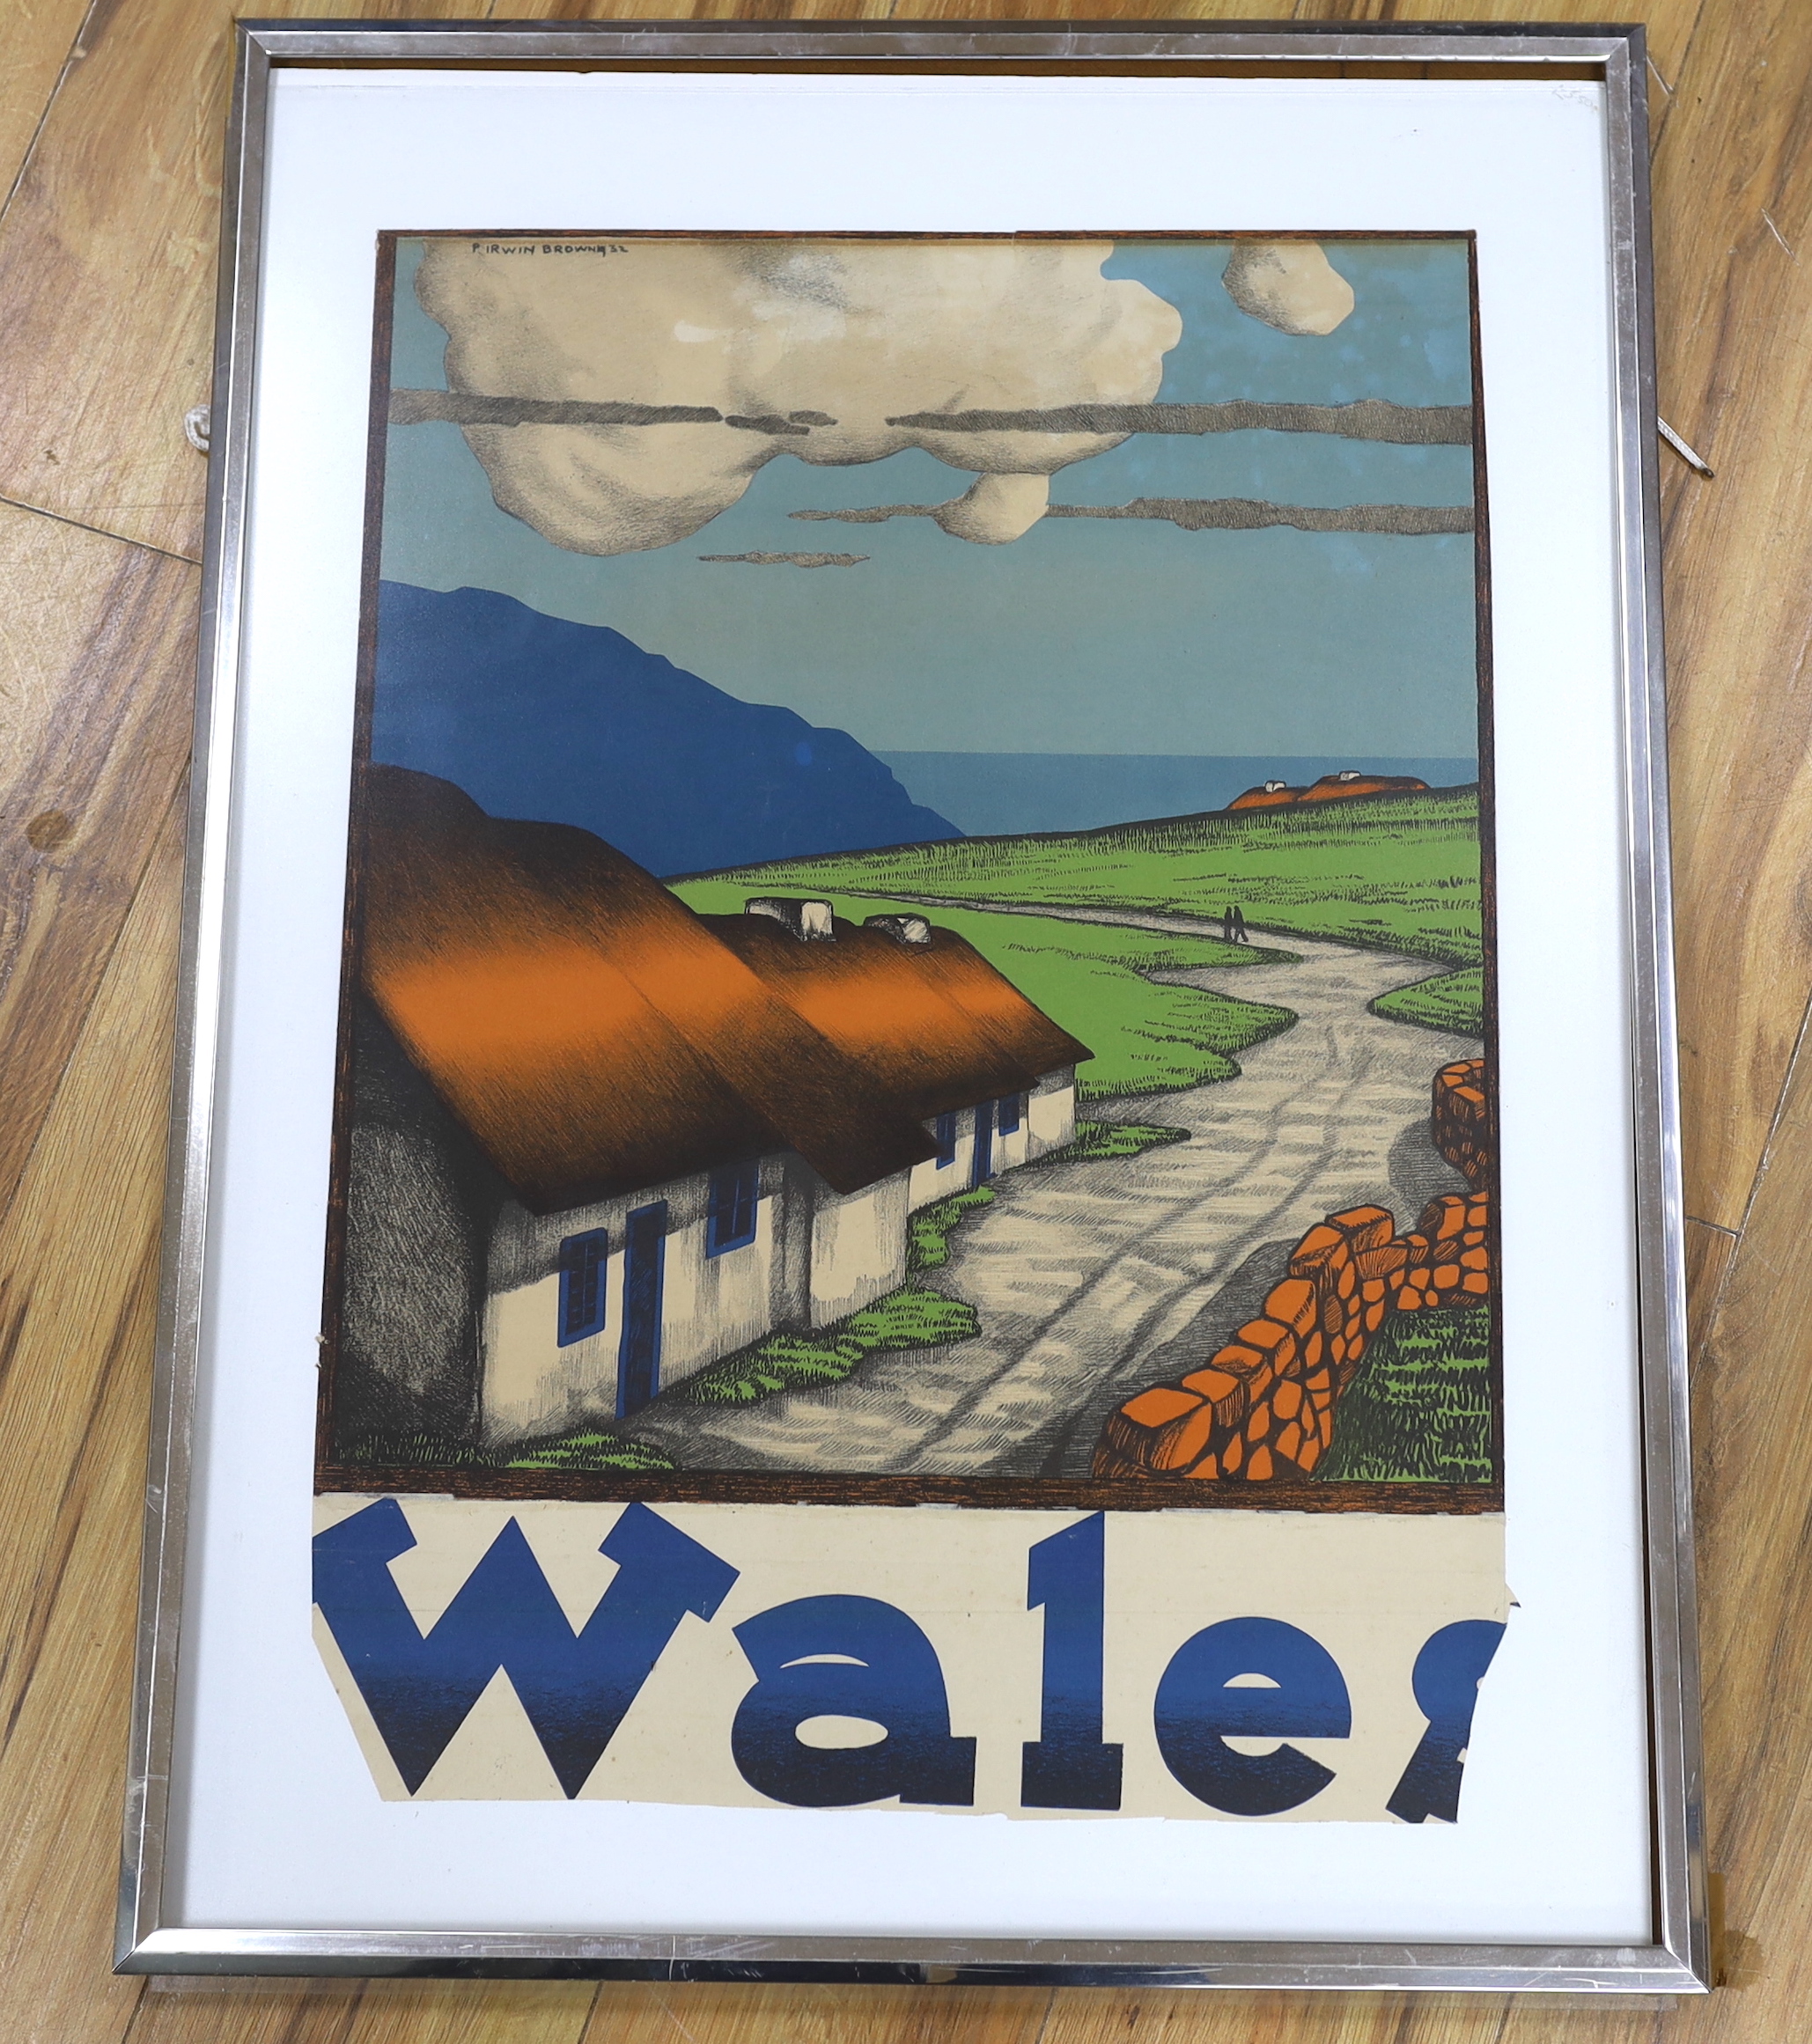 Pieter Irwin Brown (Dutch-Irish 1903-1988), colour lithograph, Wales, signed in the plate and dated 1832, 63 x 45cm